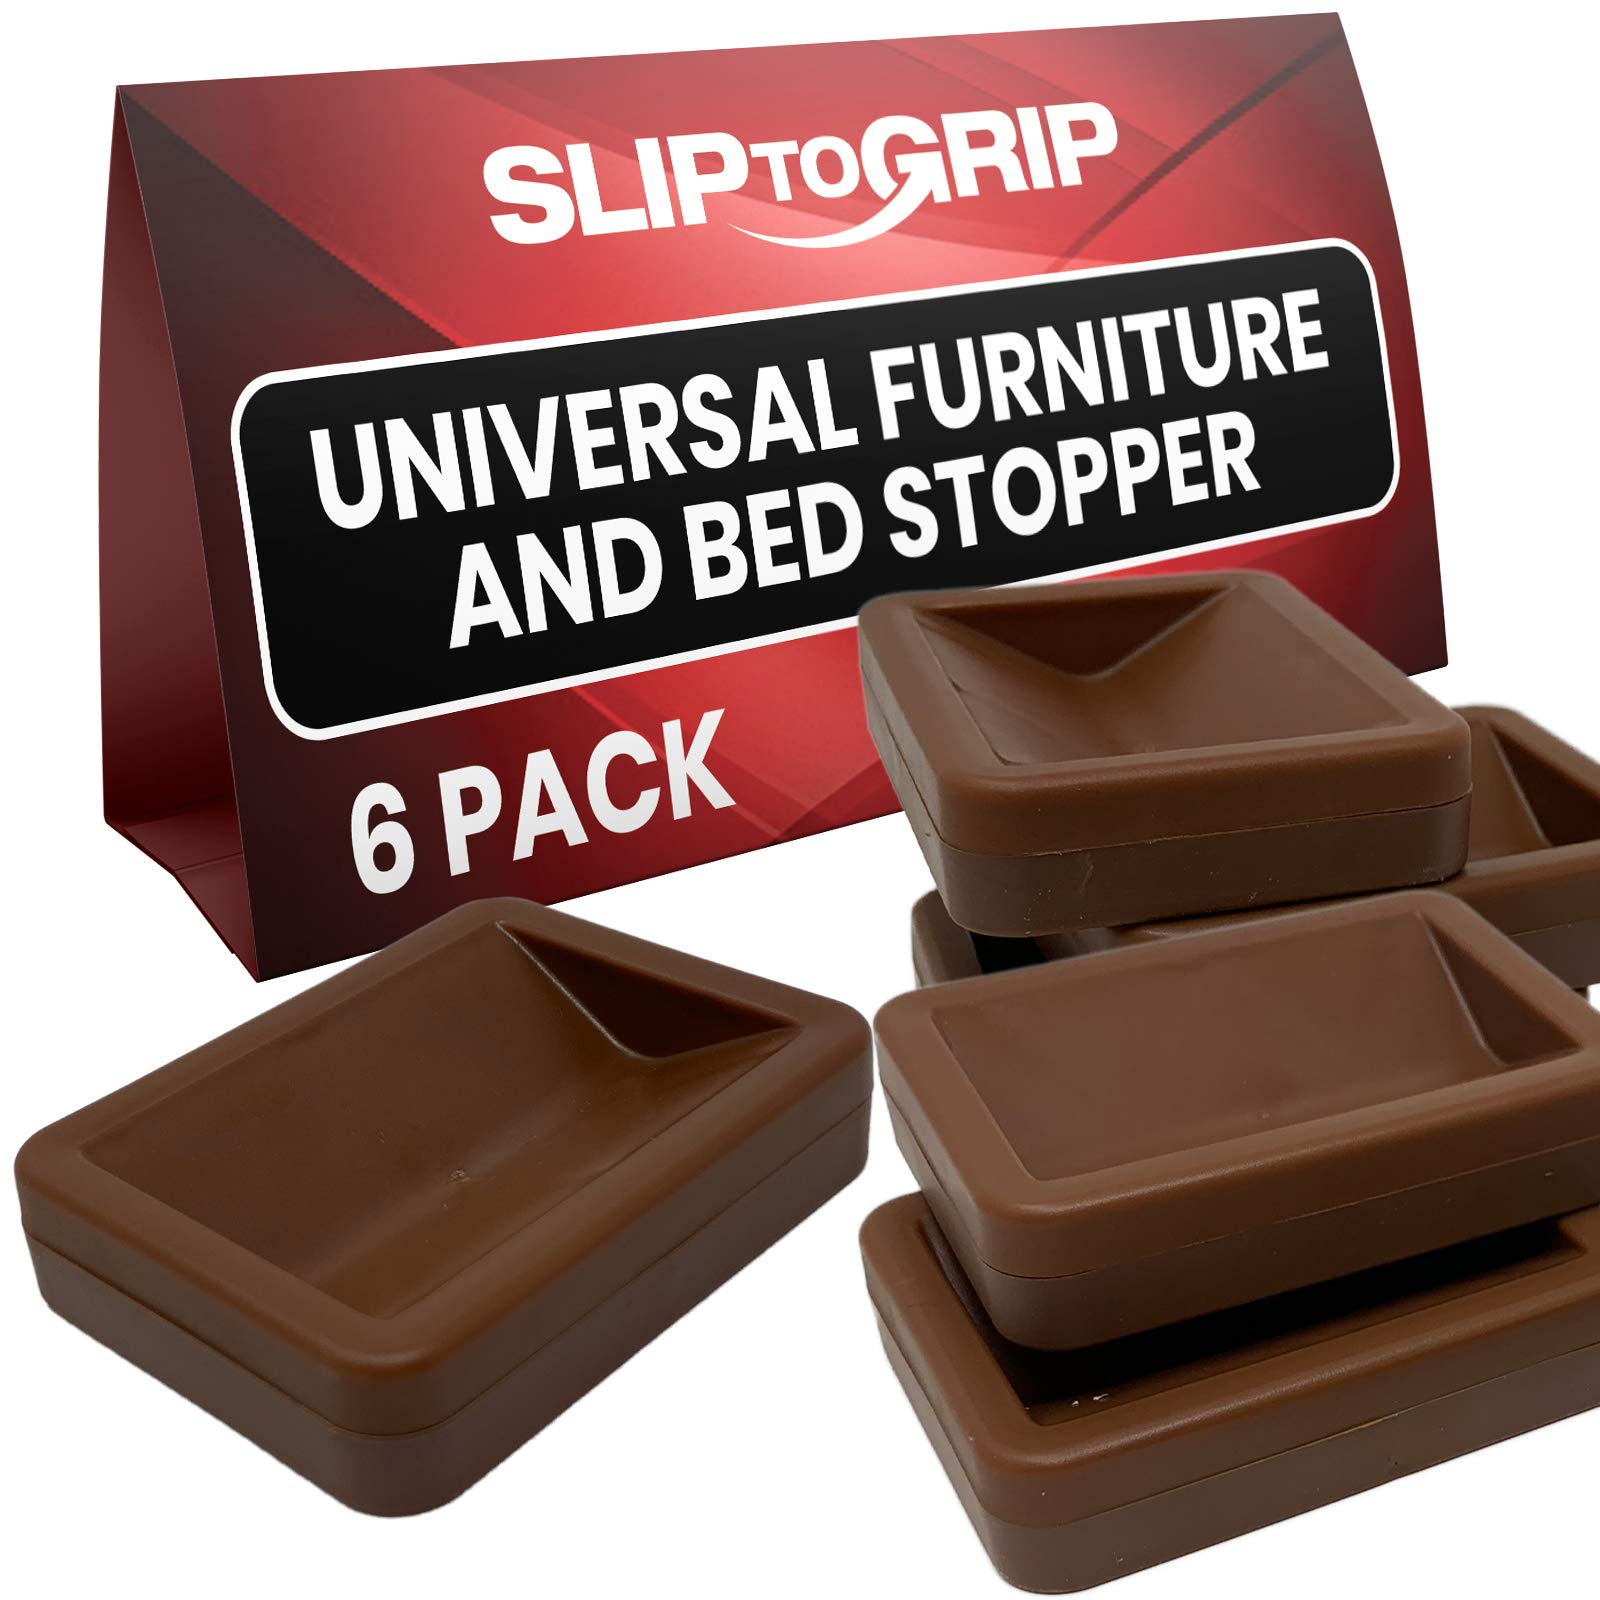 SlipToGrip Bed and Furniture Stoppers - Non Slip Rubber Backing Protects Floor, fit All Wheels of Furniture, Sofa Bed Chairs-Made up of Solid ABS Plastic Prevents Scratches and Sliding (6, Brown)  - Like New